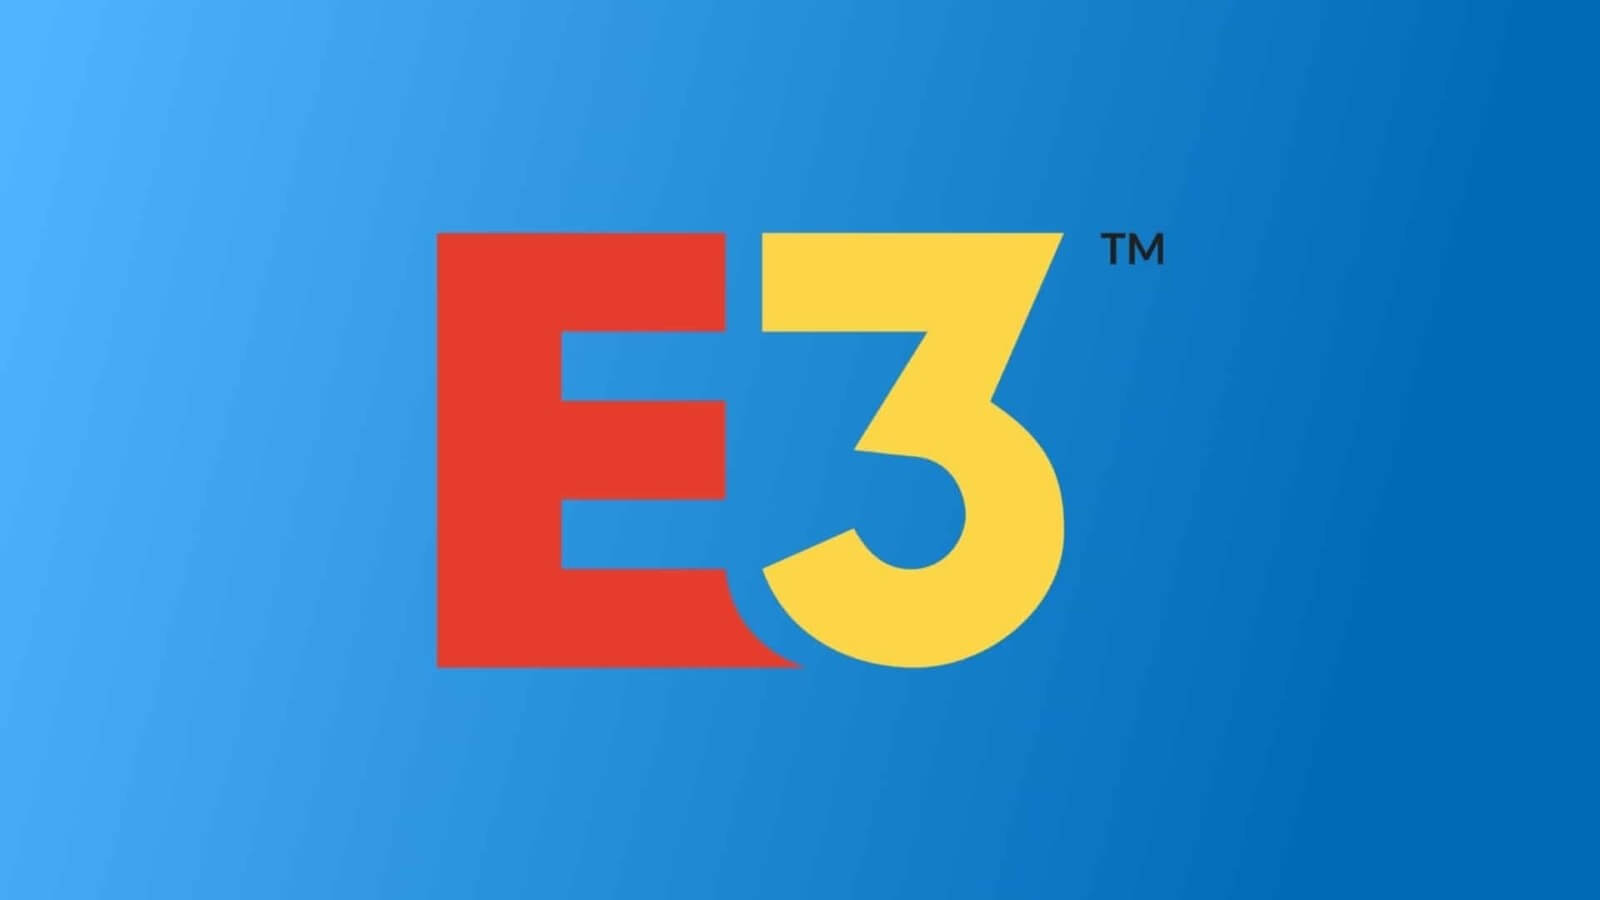 E3 2024 is in doubt; organizers hope to hold it in 2025